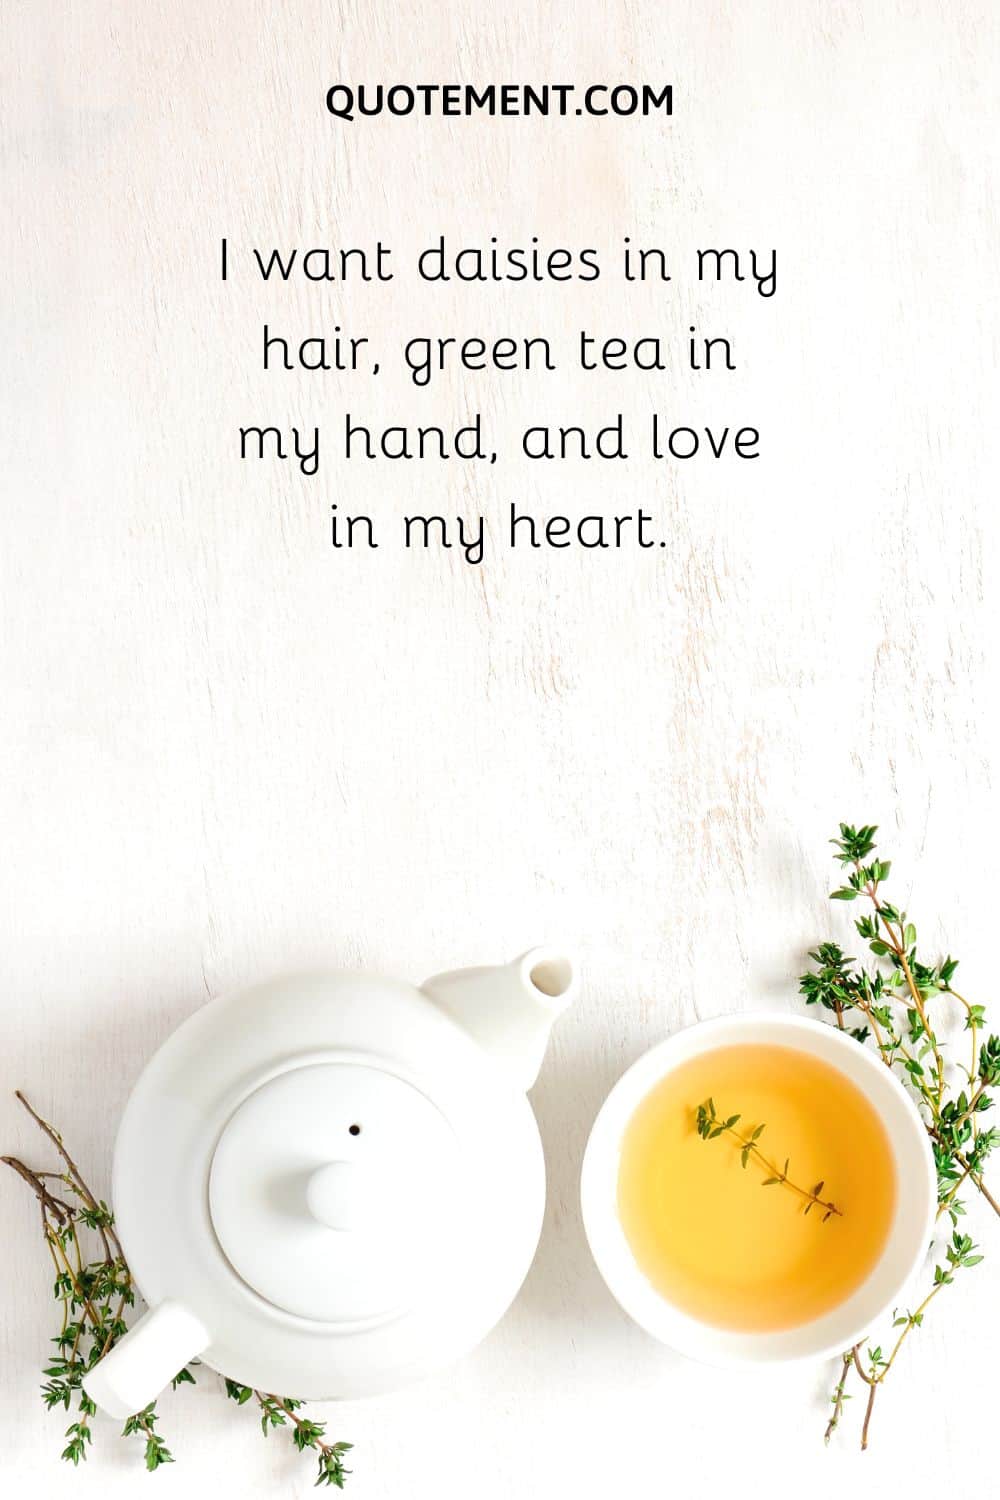 I want daisies in my hair, green tea in my hand, and love in my heart.